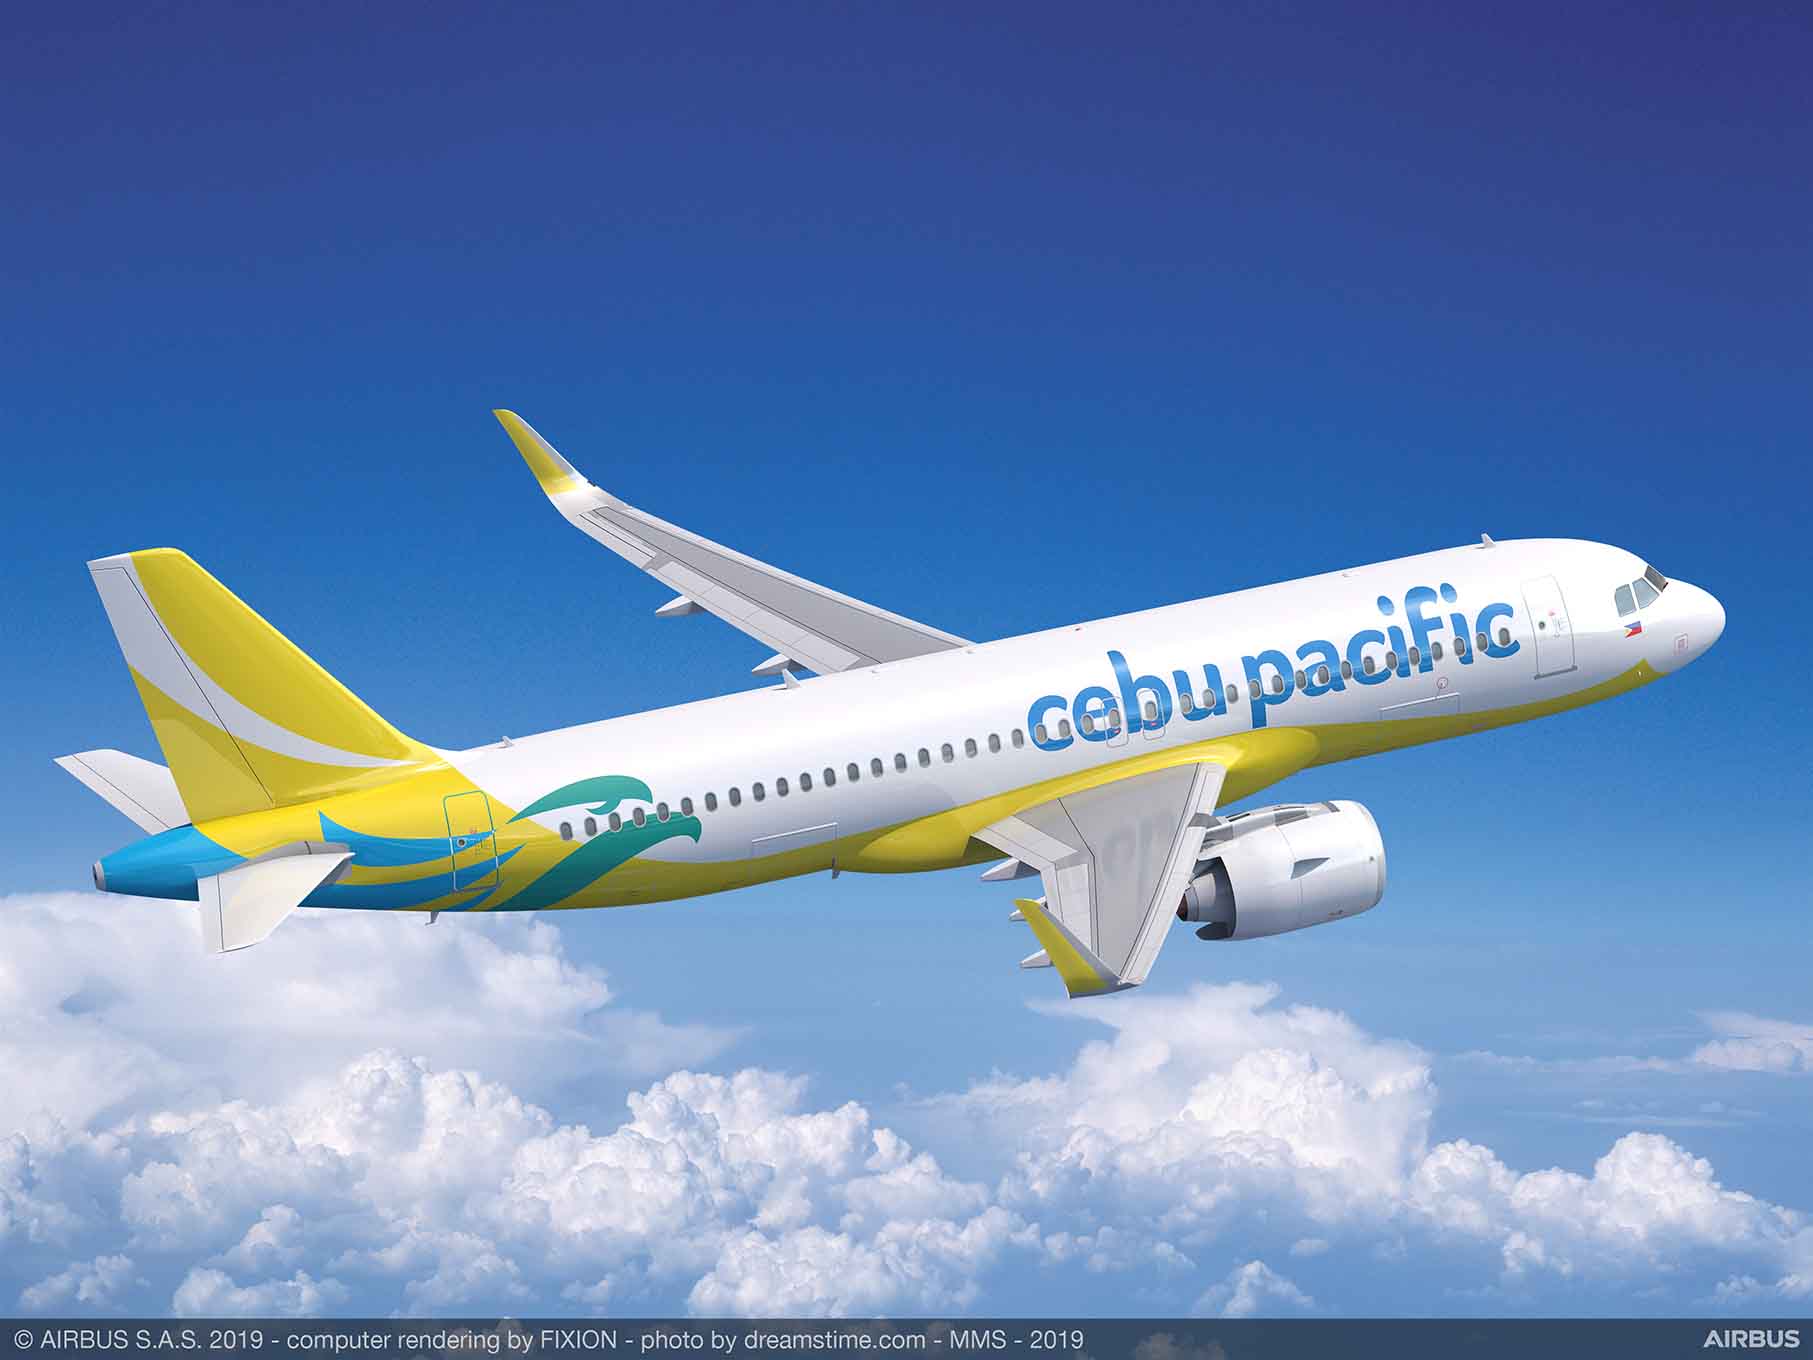 Cebu Pacific geared for robust expansion, plans to restore pre-pandemic capacity by 2024